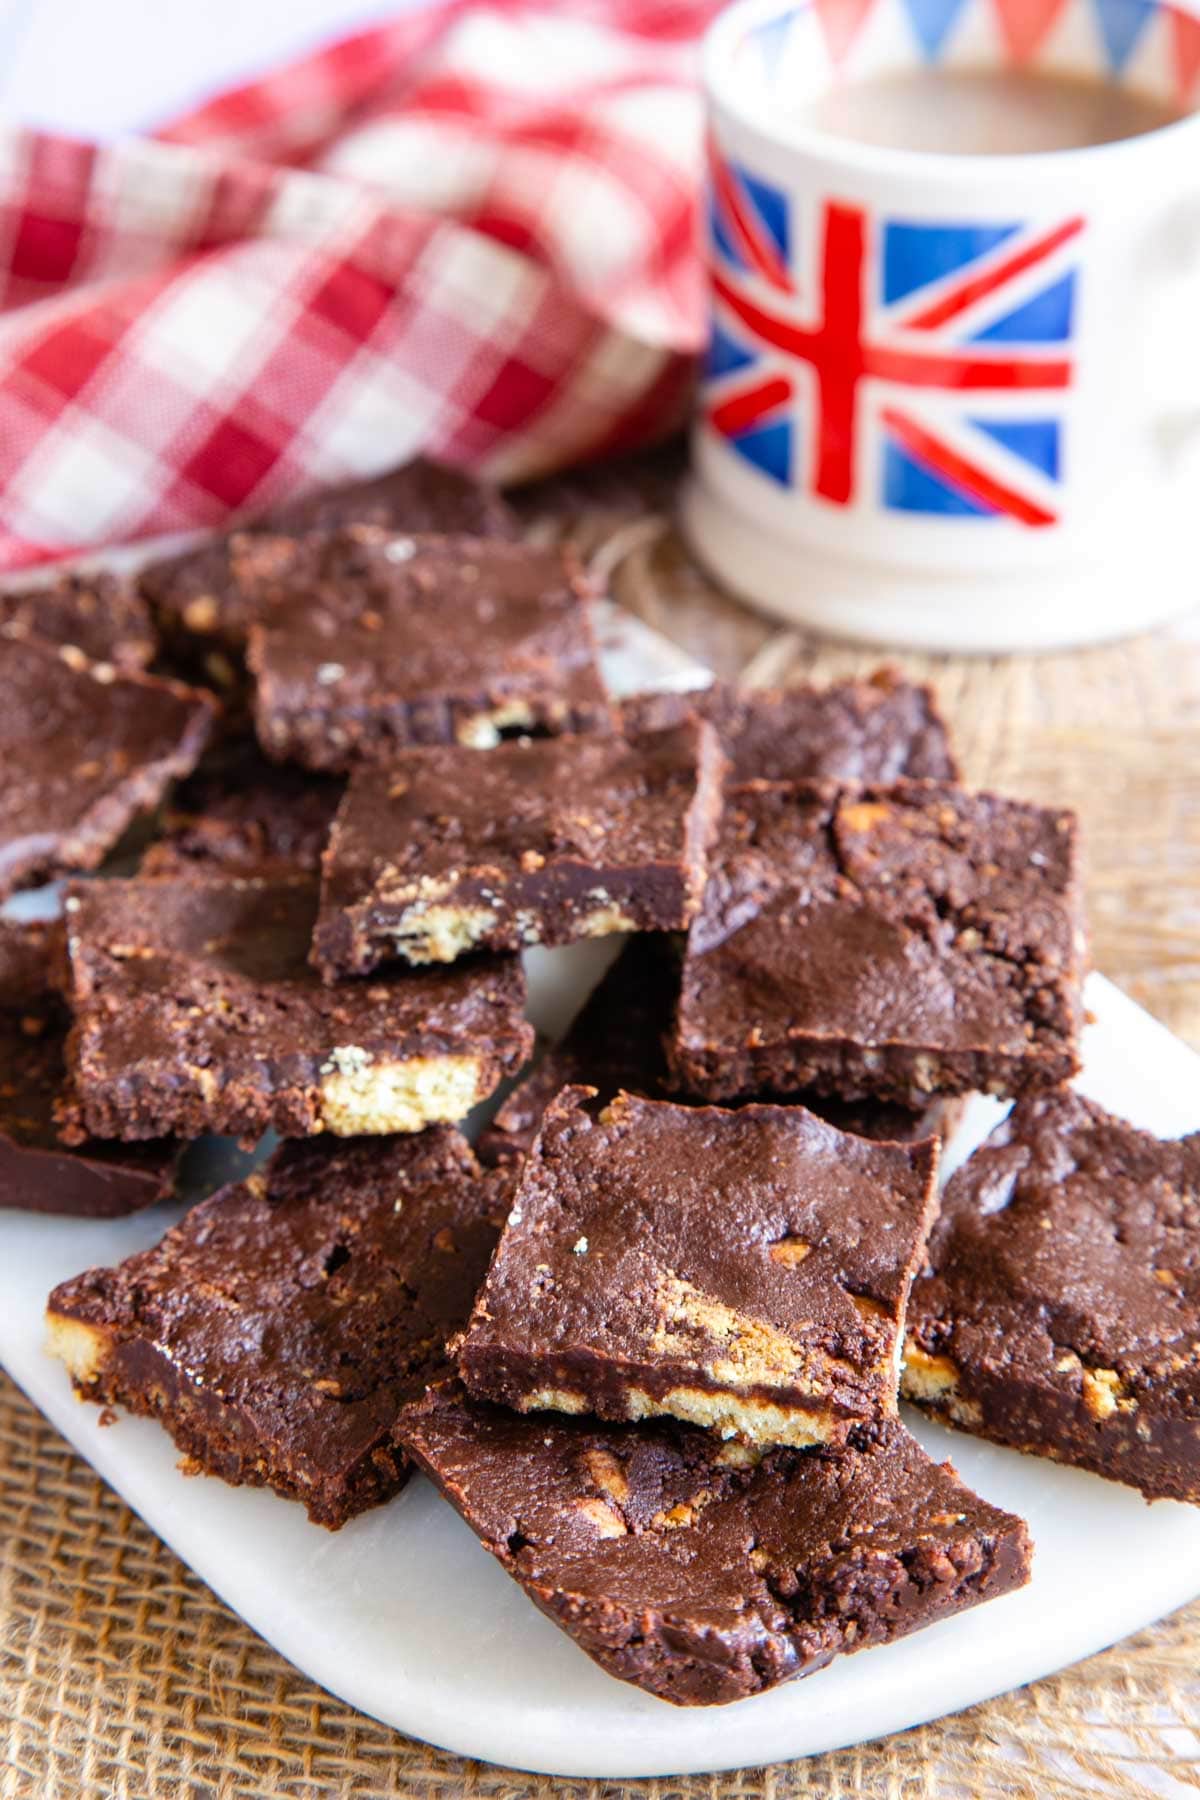 This chocolate tiffin recipe is perfect for teatime treats, so serve it with a mug of your favourite tea!